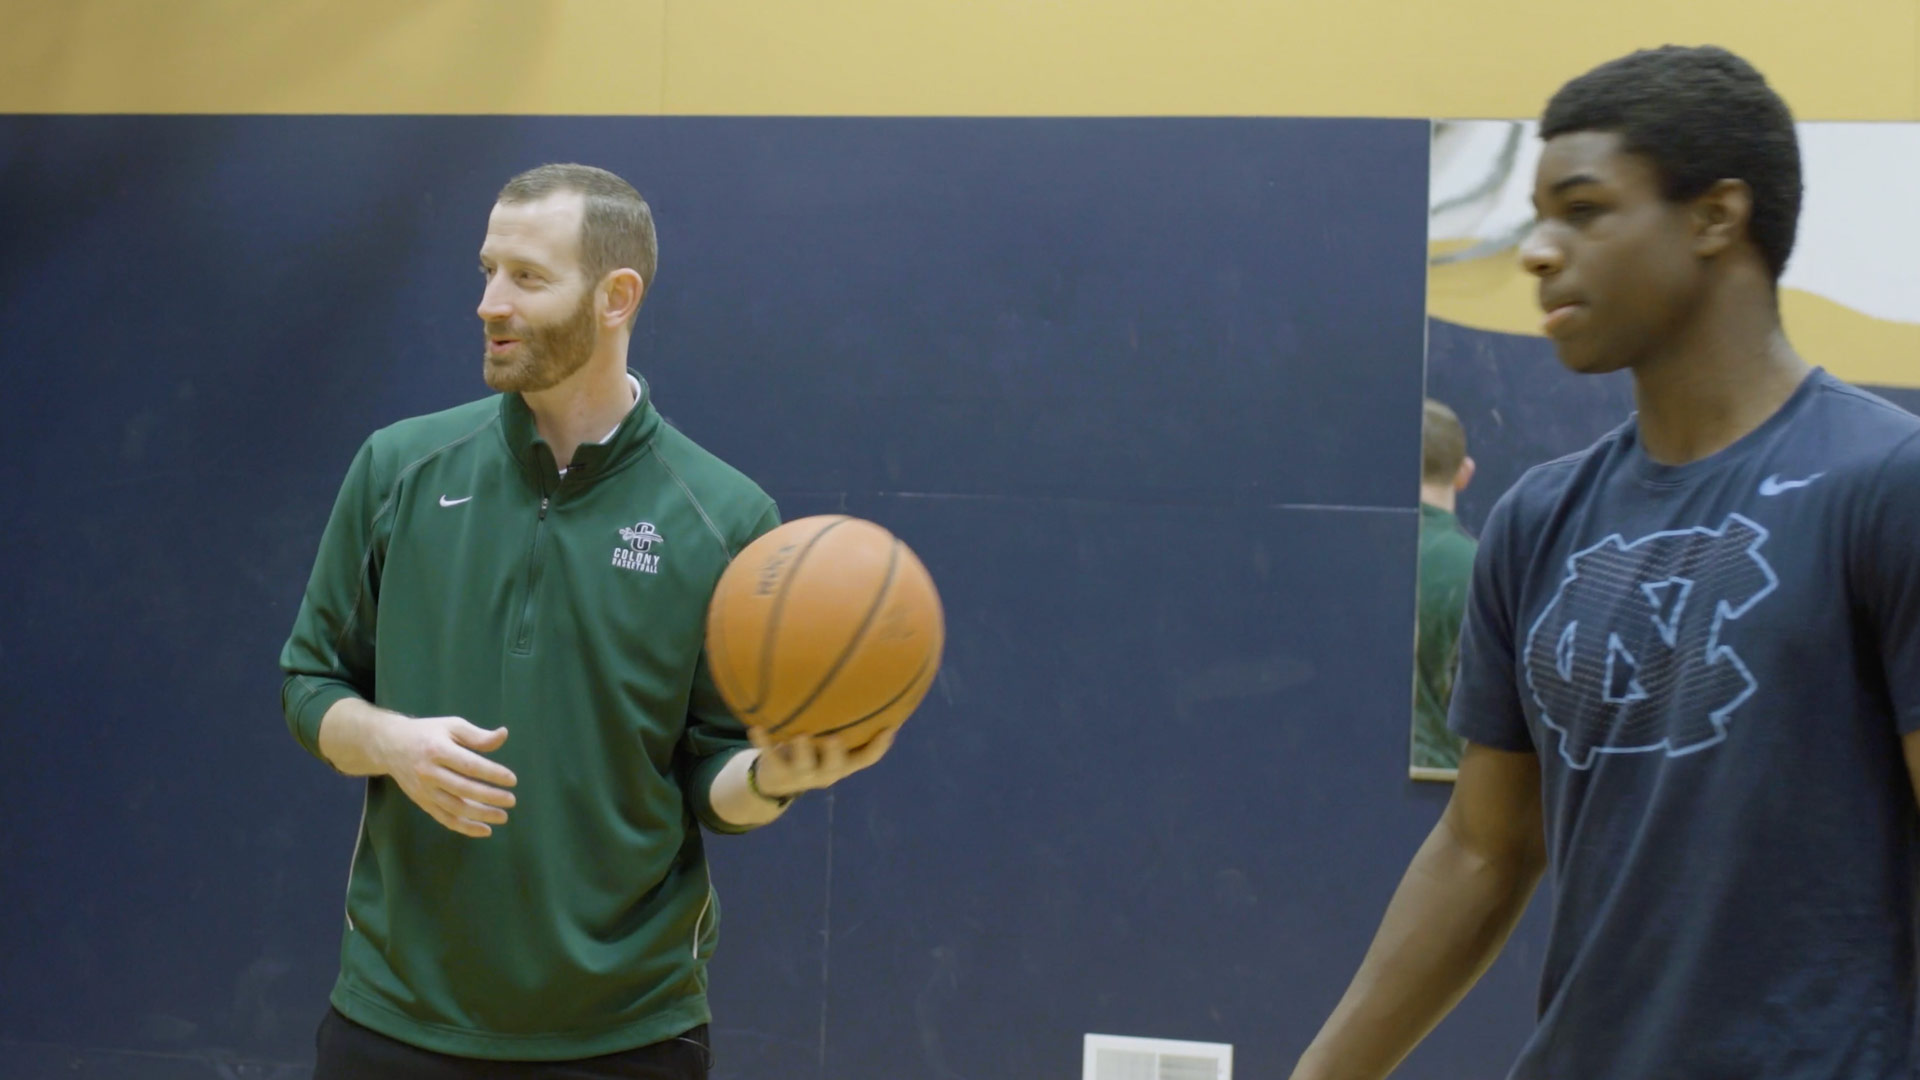 Basketball coach smiling with younger player walking past